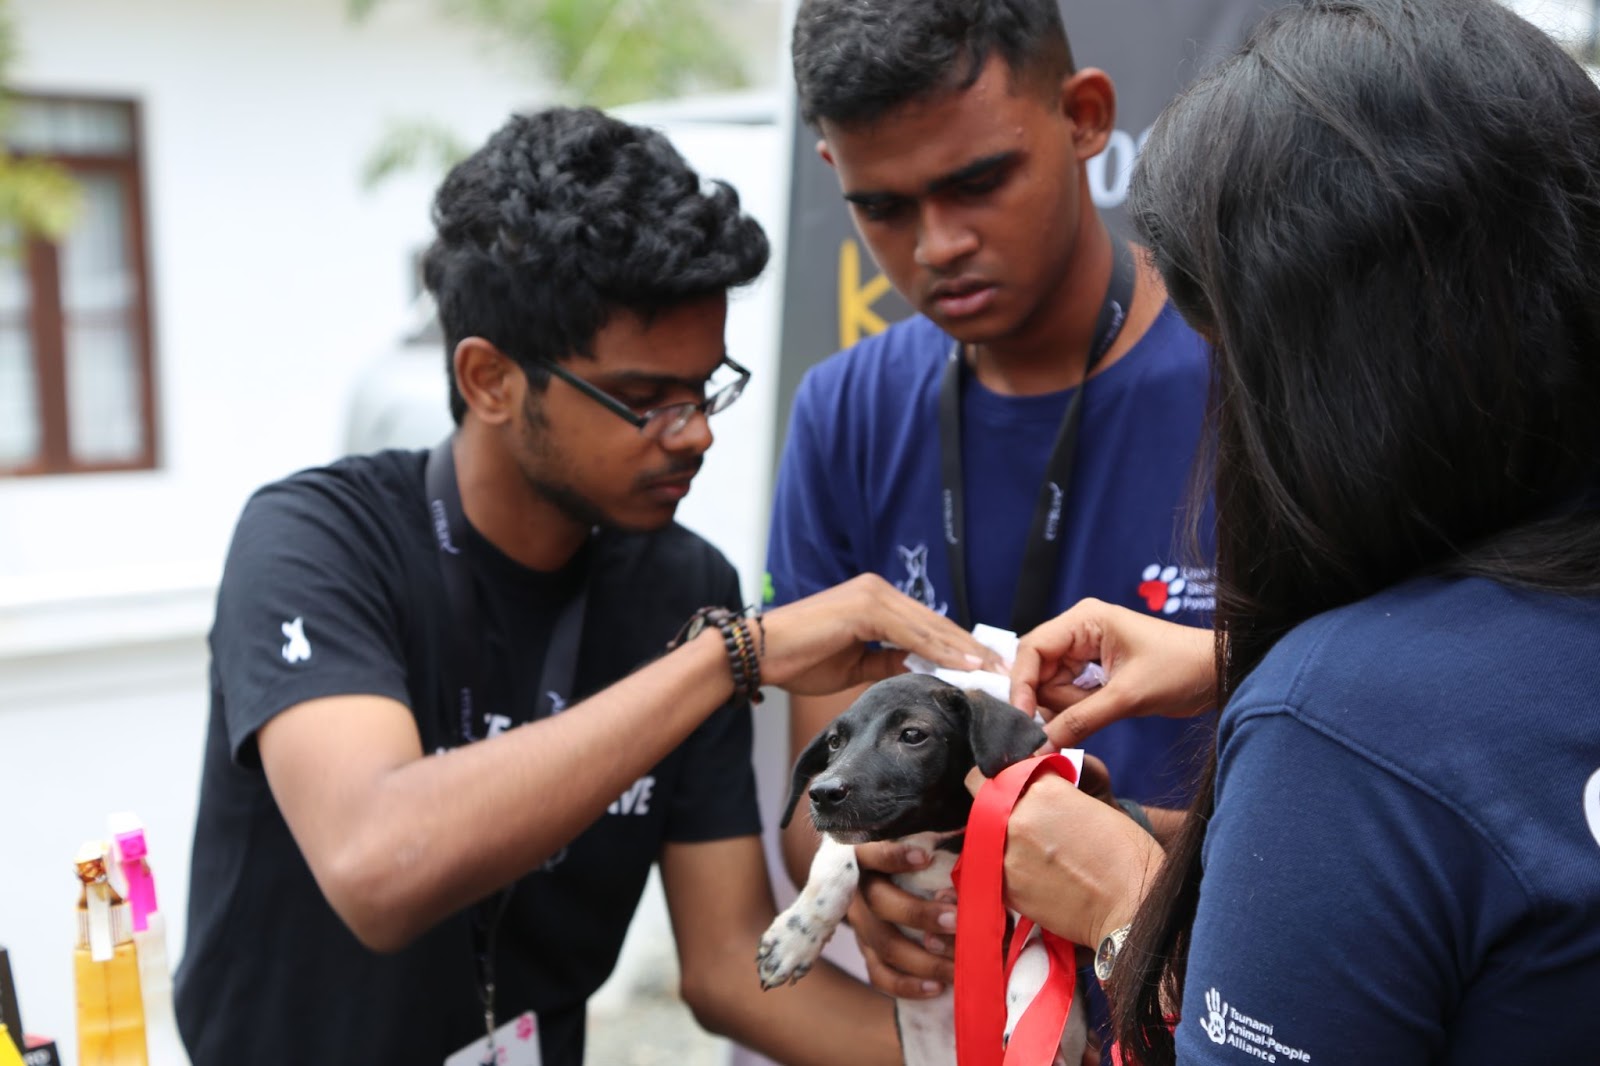 Embark volunteers at an adoption drive holding a puppy.